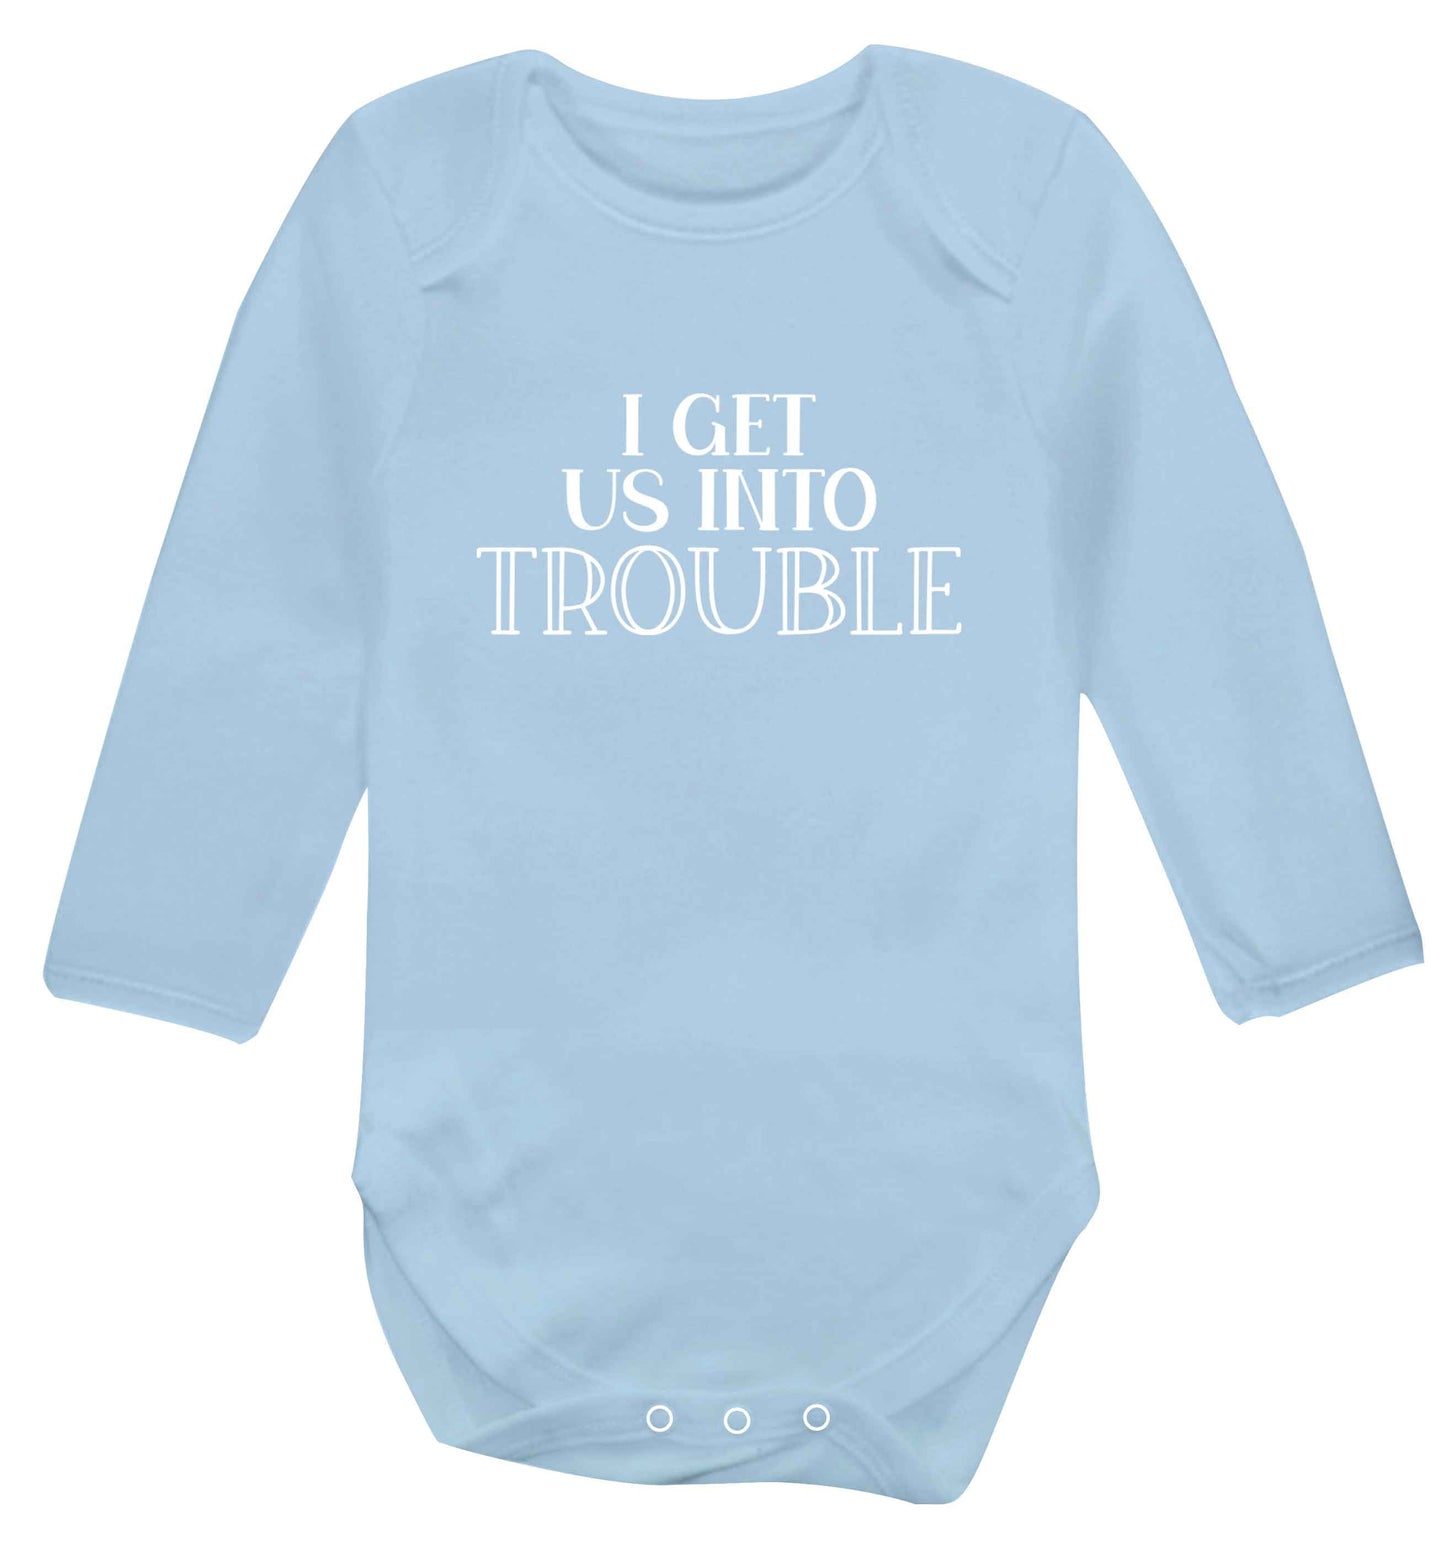 I get us into trouble baby vest long sleeved pale blue 6-12 months